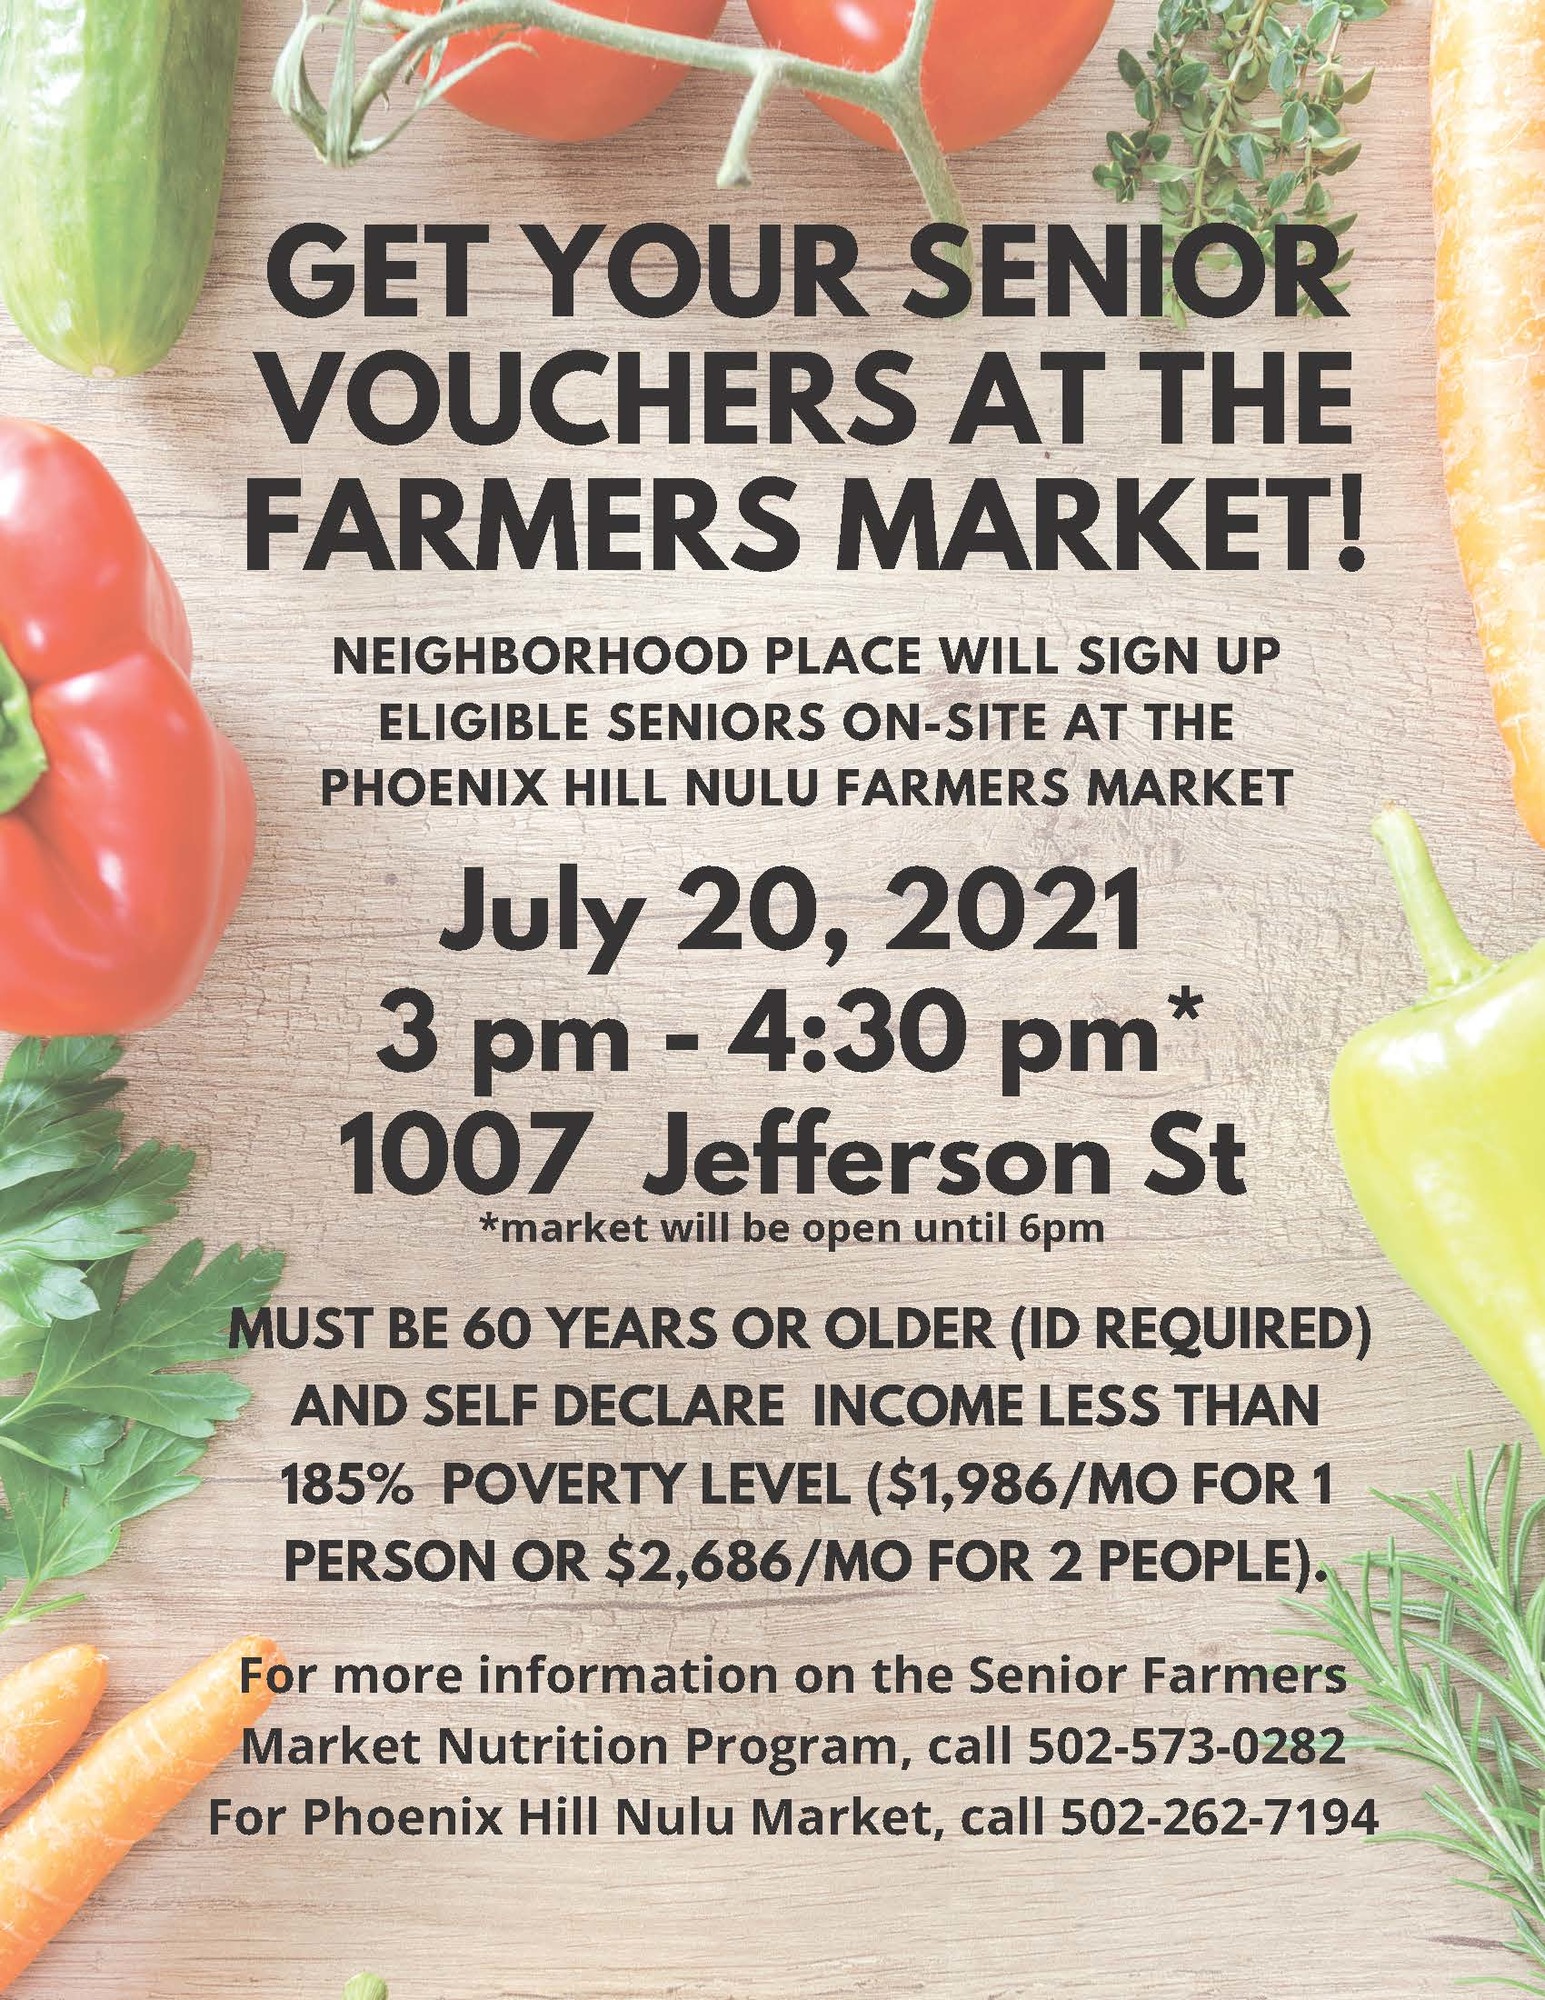 Get your senior vouchers at the Farmers Market on July 20th